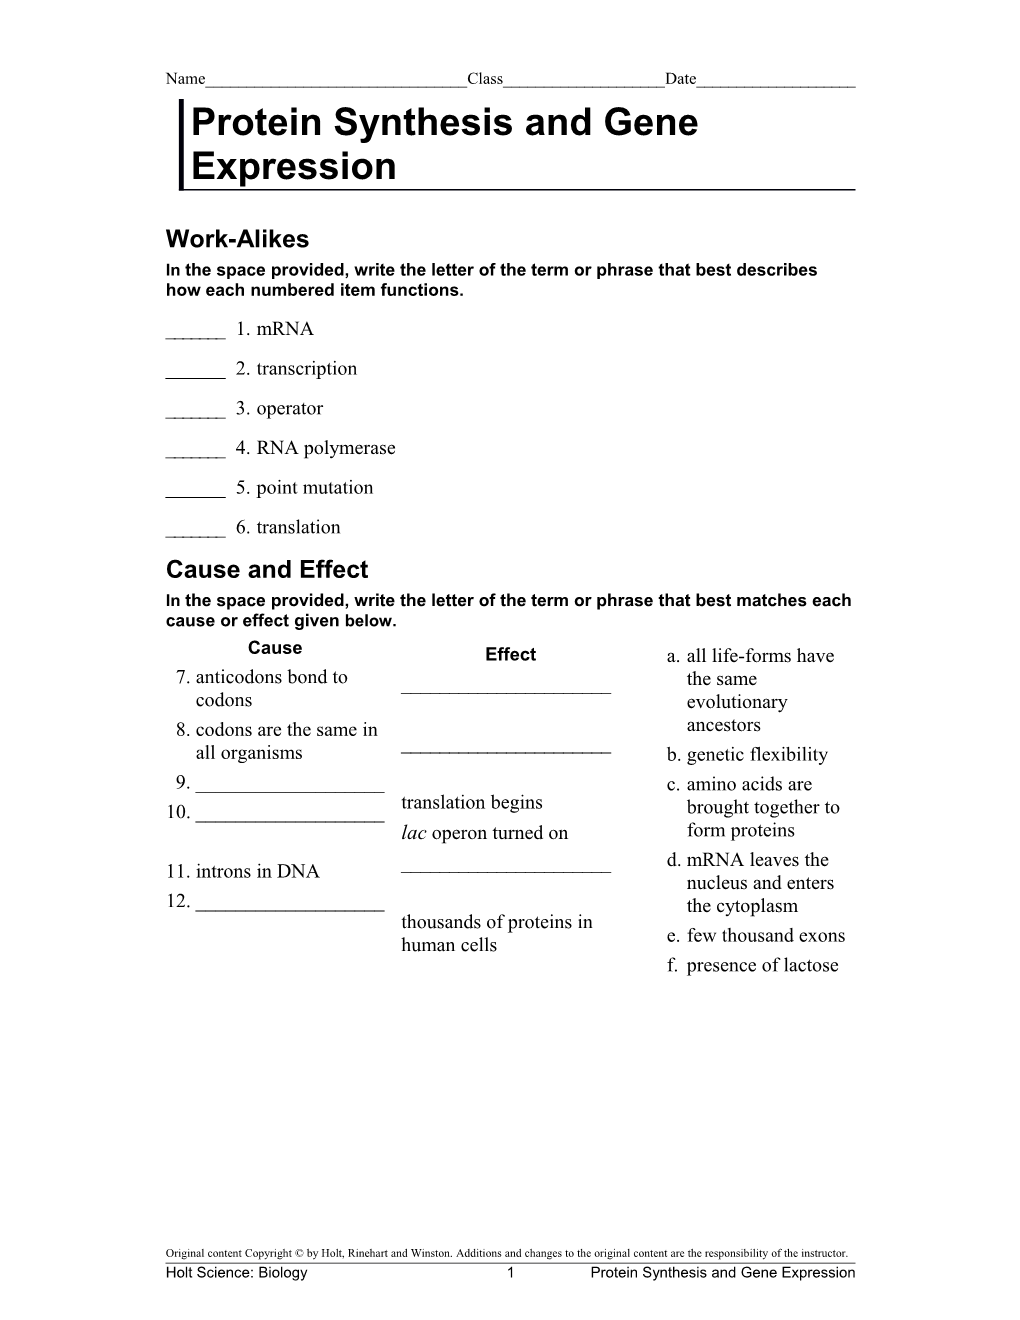 Protein Synthesis and Gene Expression